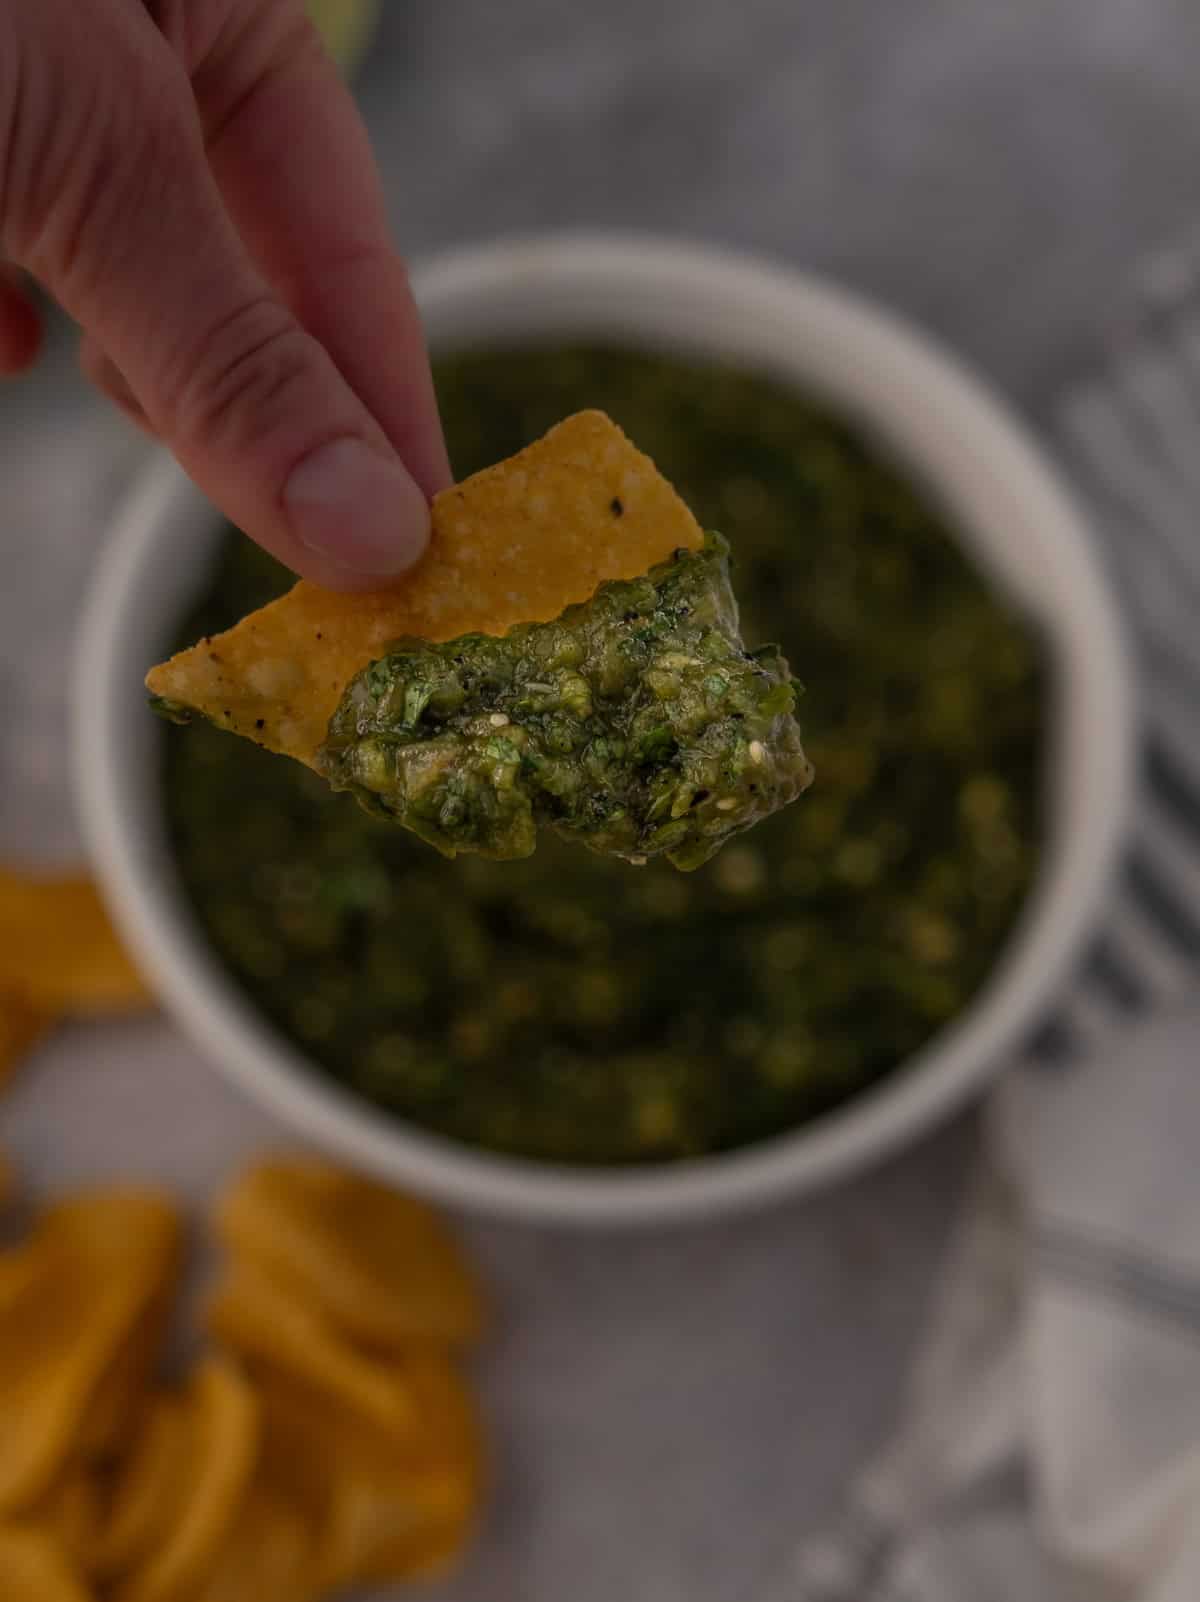 A chip being dipped into a Hatch green chile salsa.